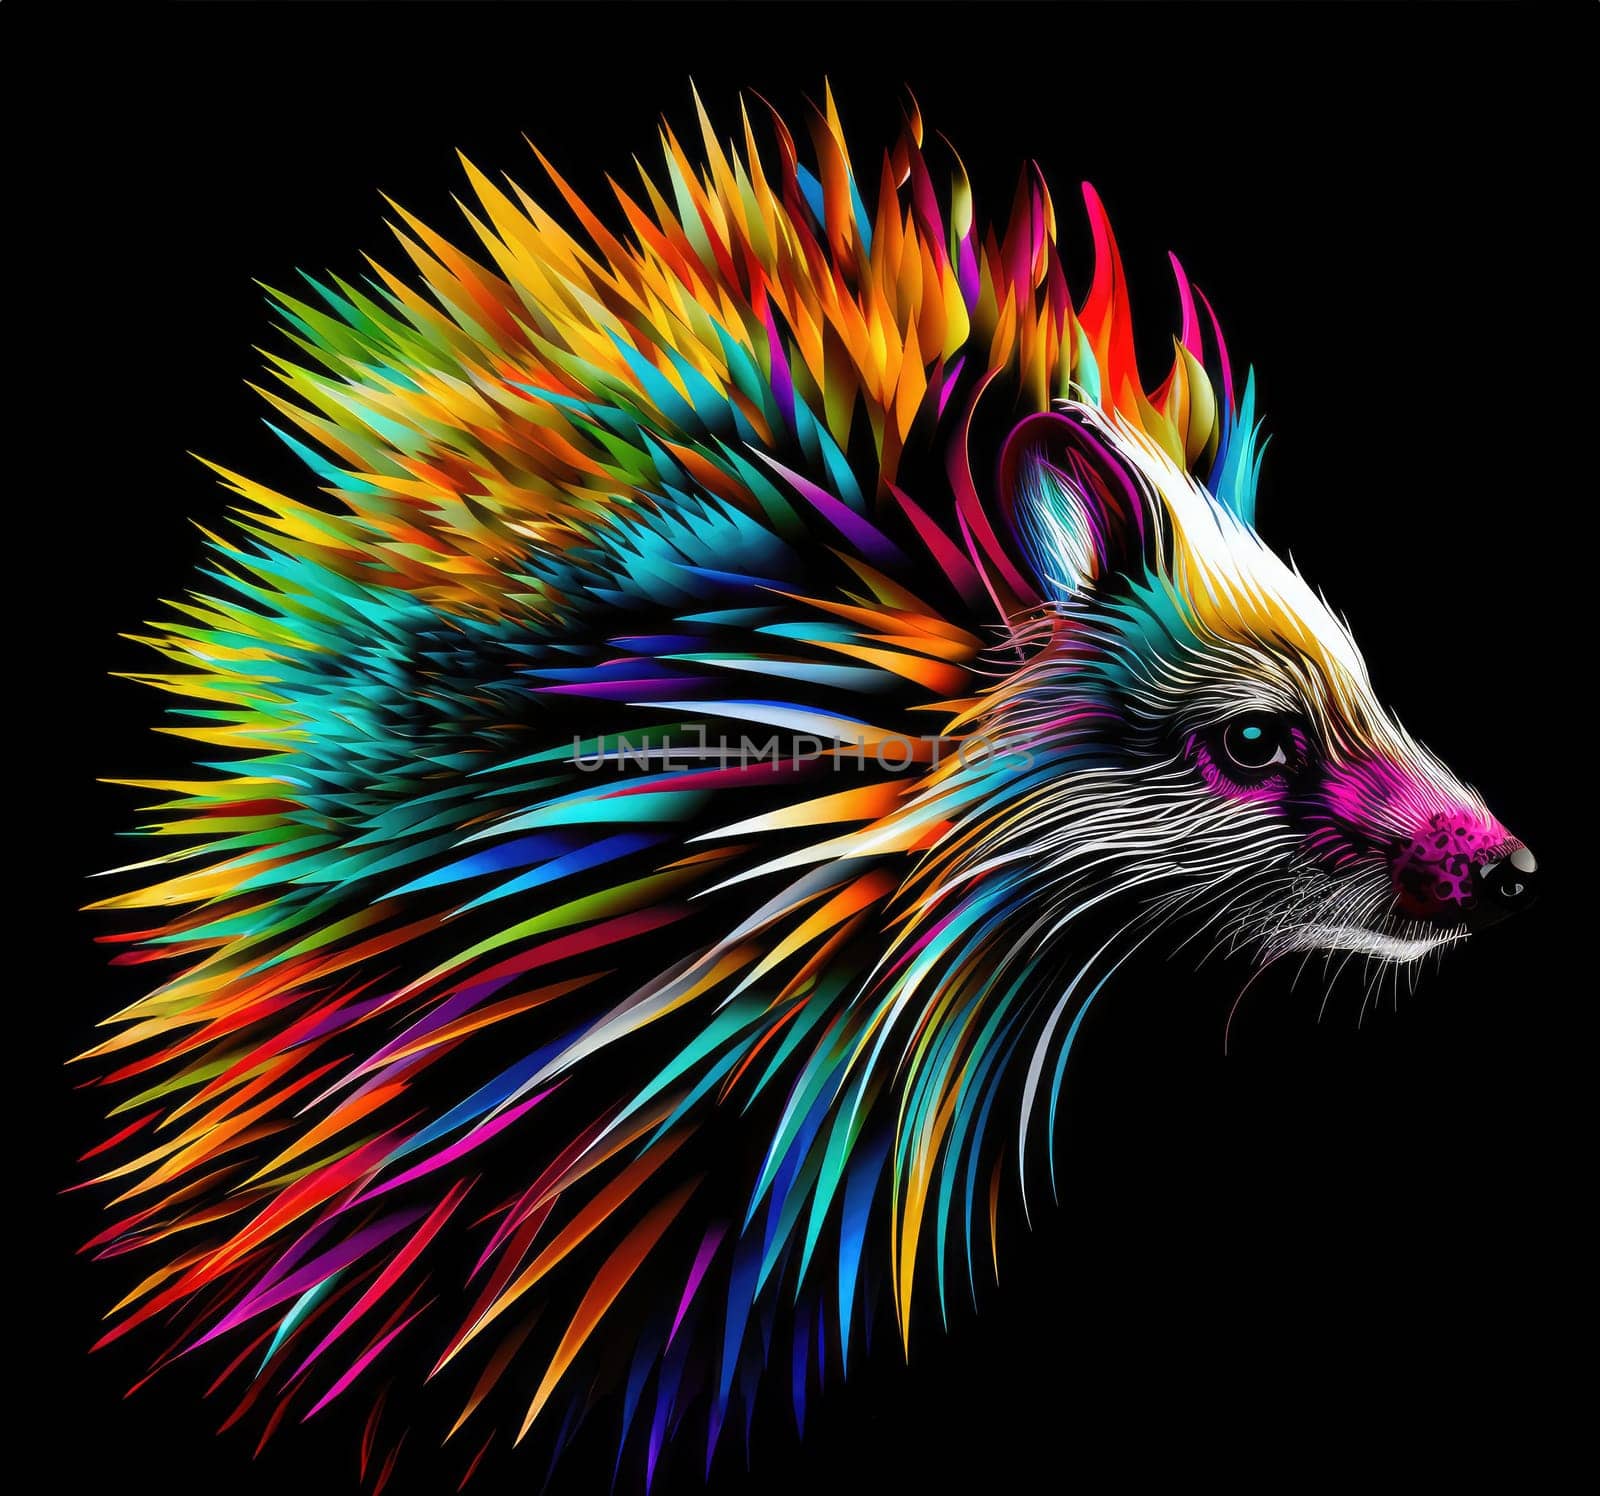 Porcupine in bright psychedelic pop art style isolated on black background. Template for t-shirt print, poster, sticker, etc.